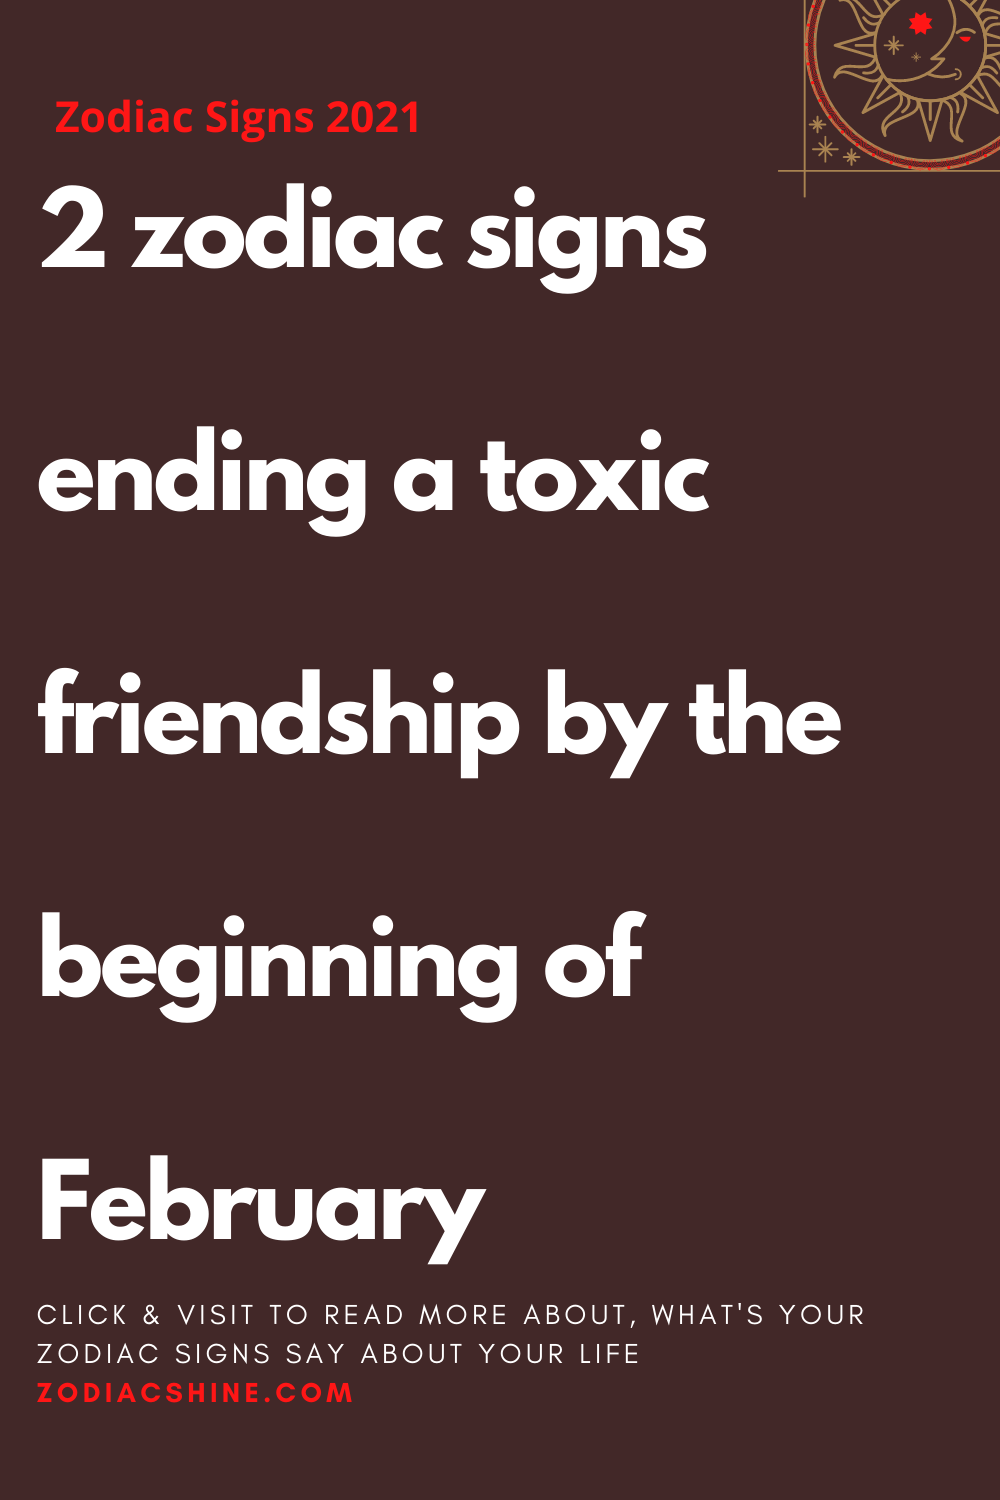 2 zodiac signs ending a toxic friendship by the beginning of February